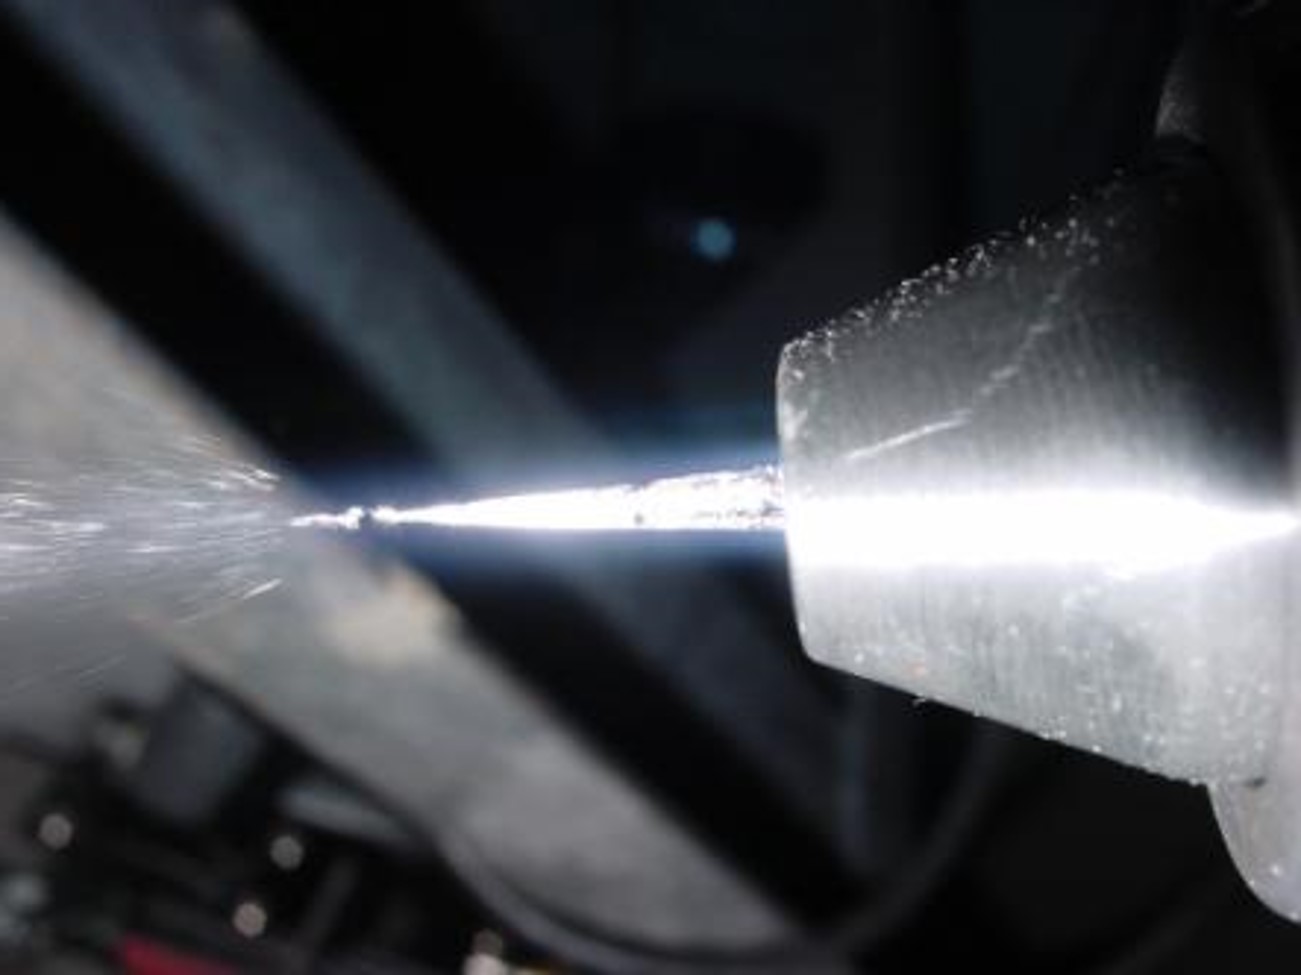 Flame spray consists of a spray material being continuously melted in the center of an acetylene-propane-oxygen flame.